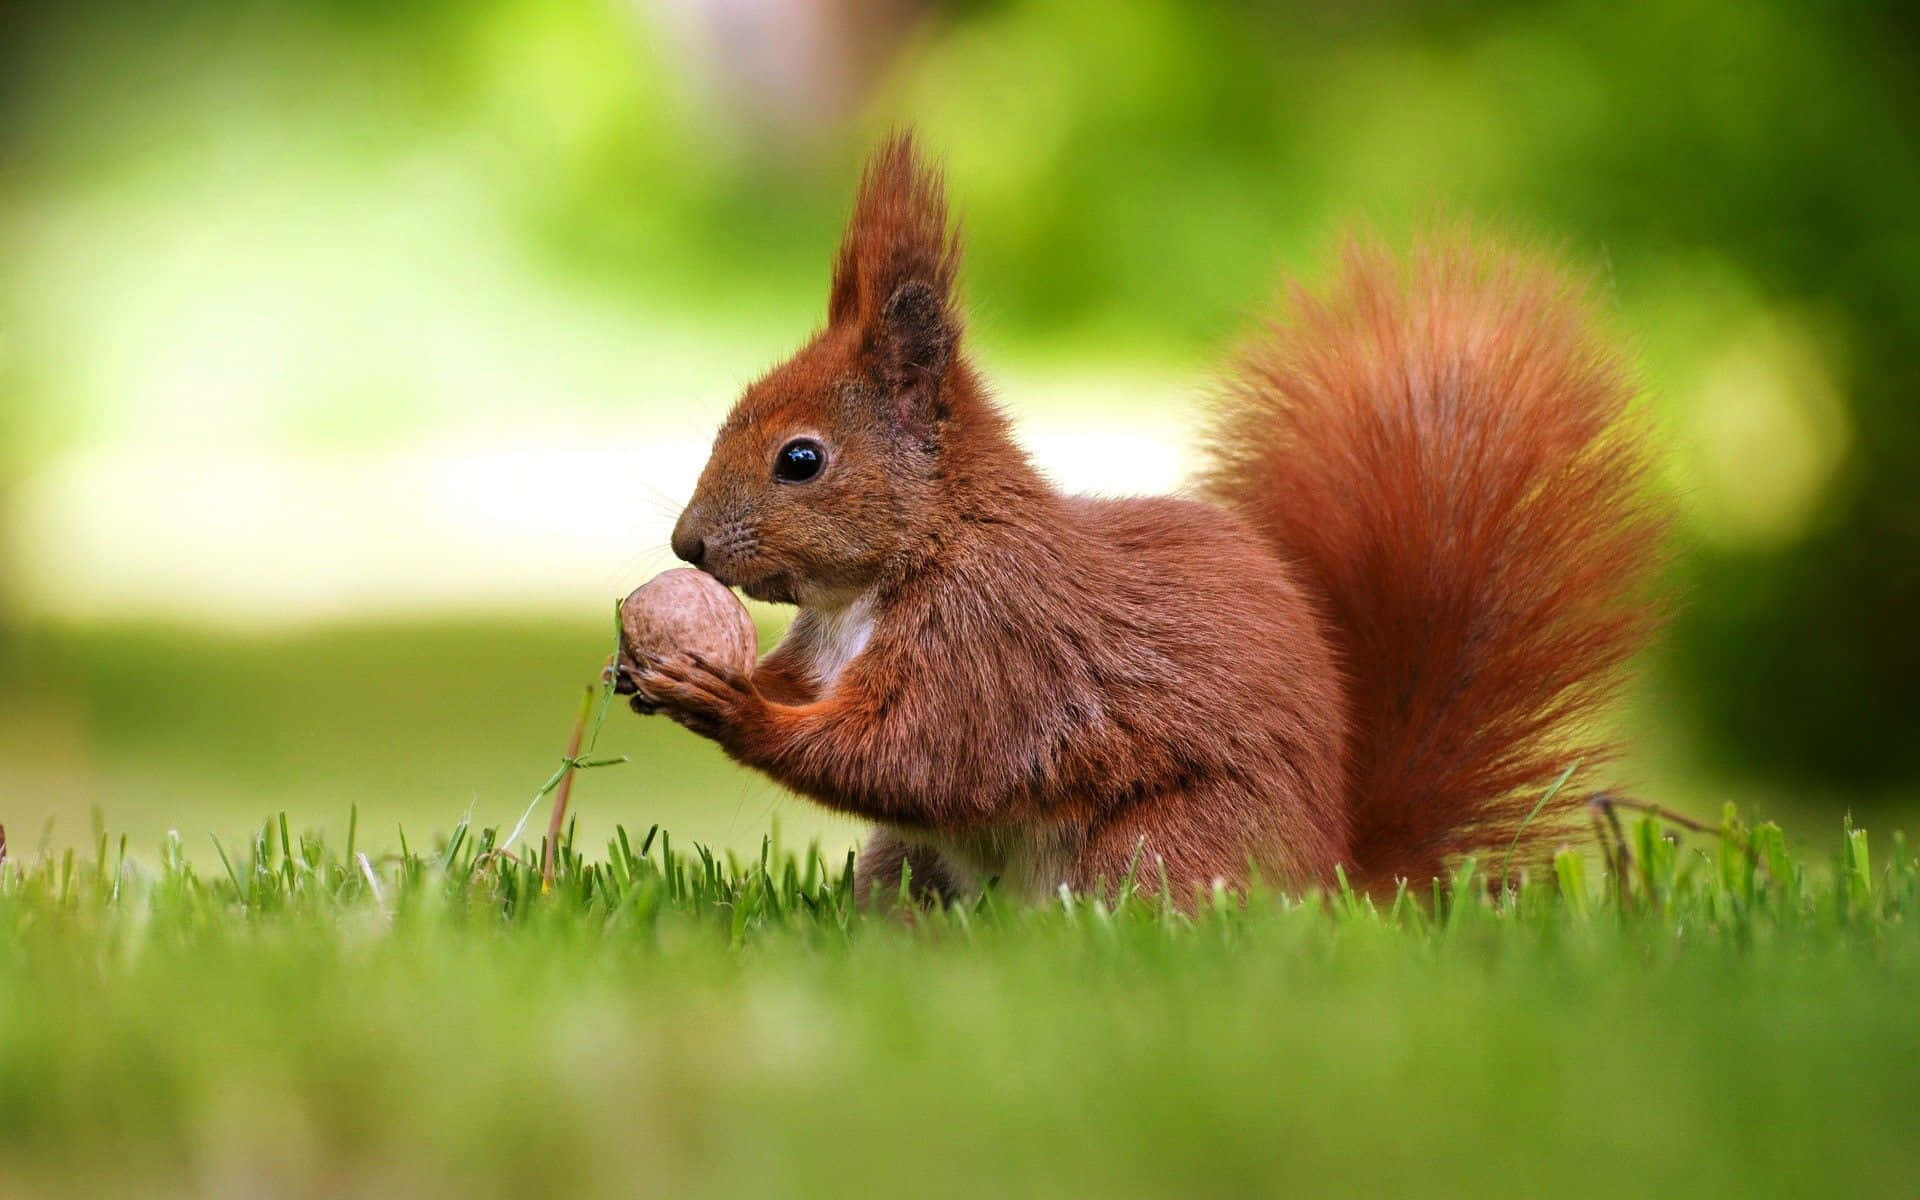 Funny Squirrel Eating Nut On Grass Pictures